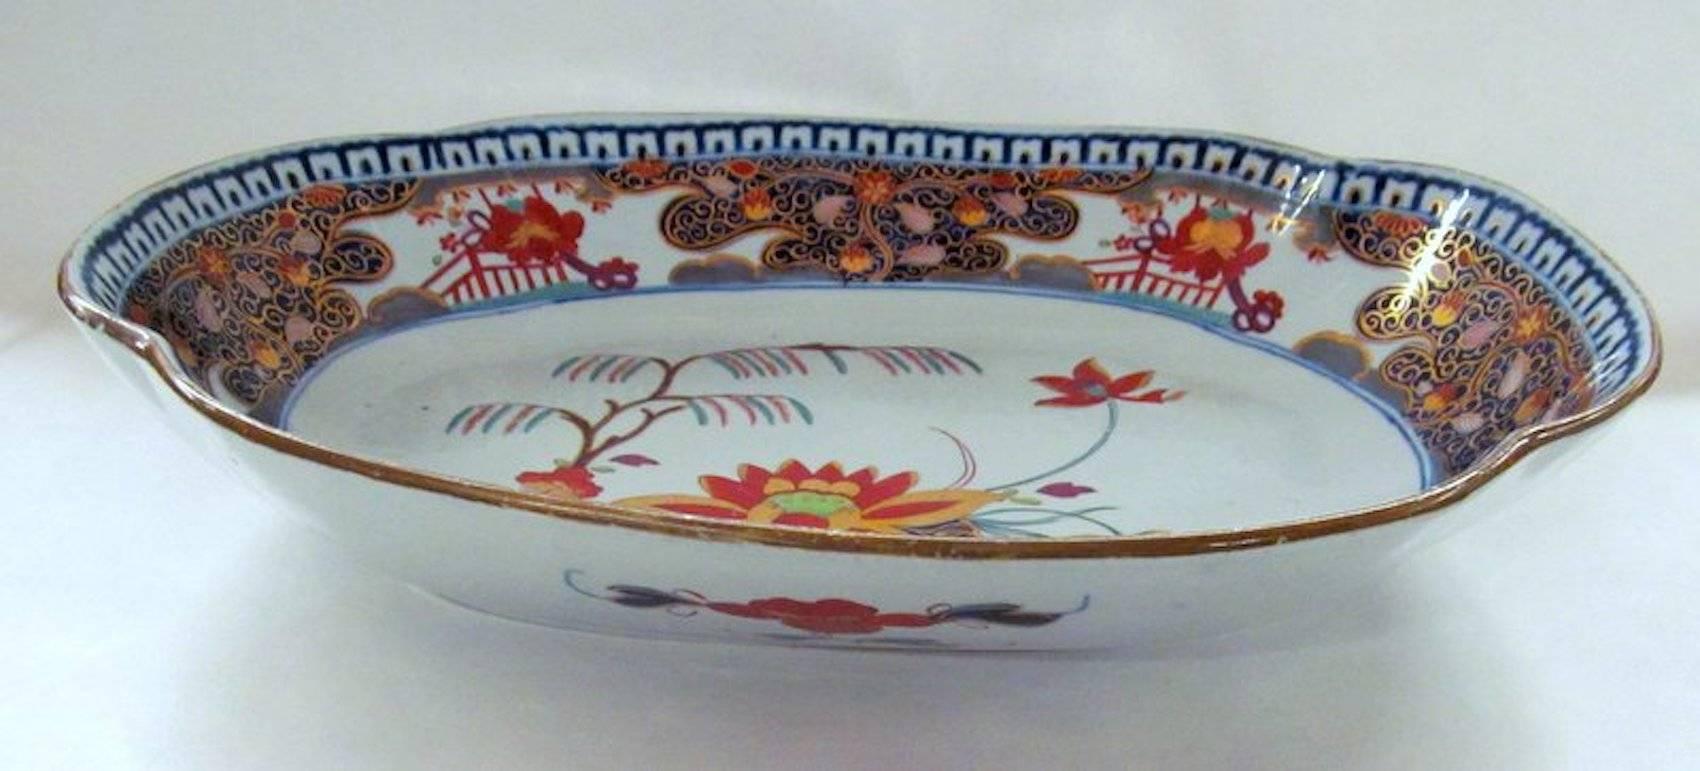 Very rare Antique English Turner's Patent ironstone large oval Imari bowl in the Water Lily and Willow pattern;    As illustrated on pg. 330 of G. Godden's 